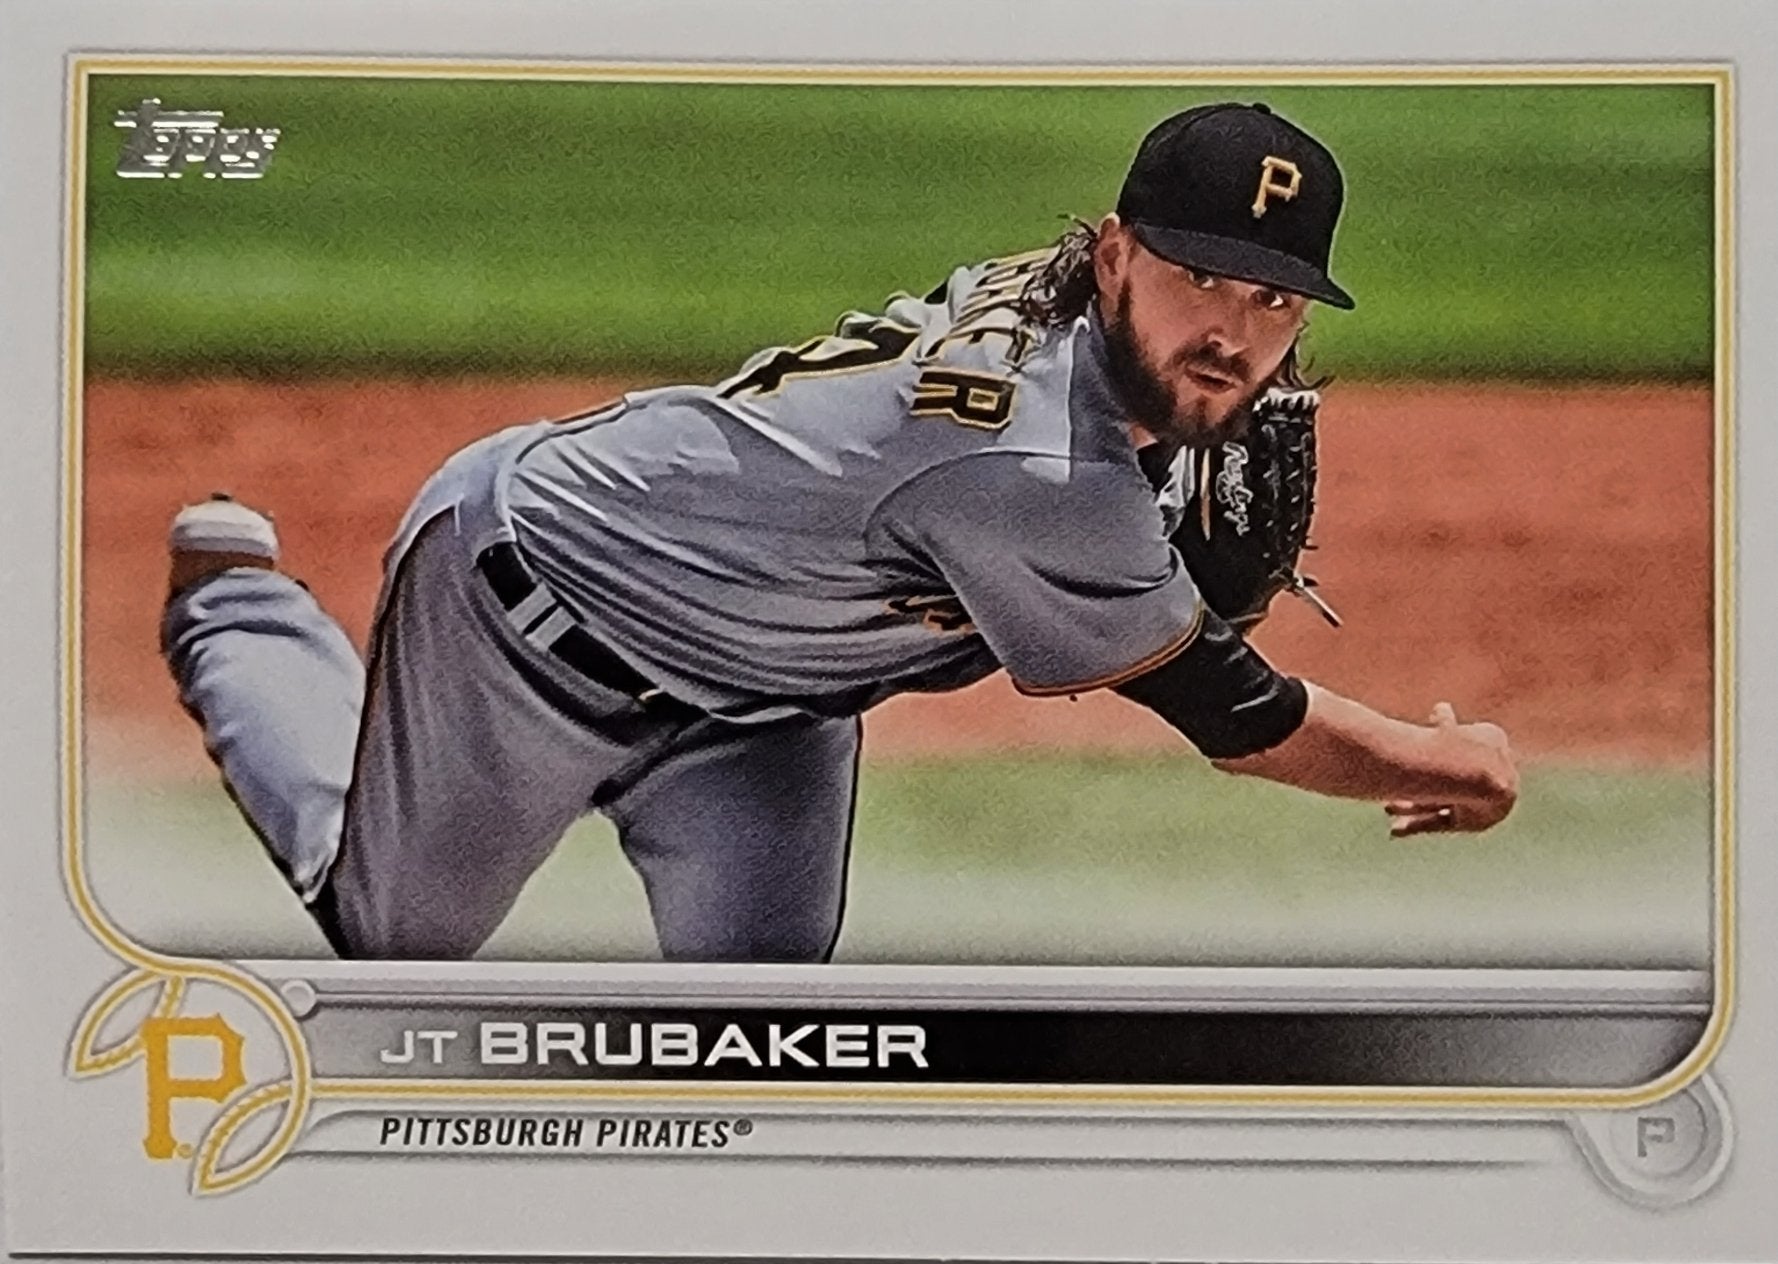 2022 Topps Series 2 JT Brubaker Baseball Card AVM1 simple Xclusive Collectibles   